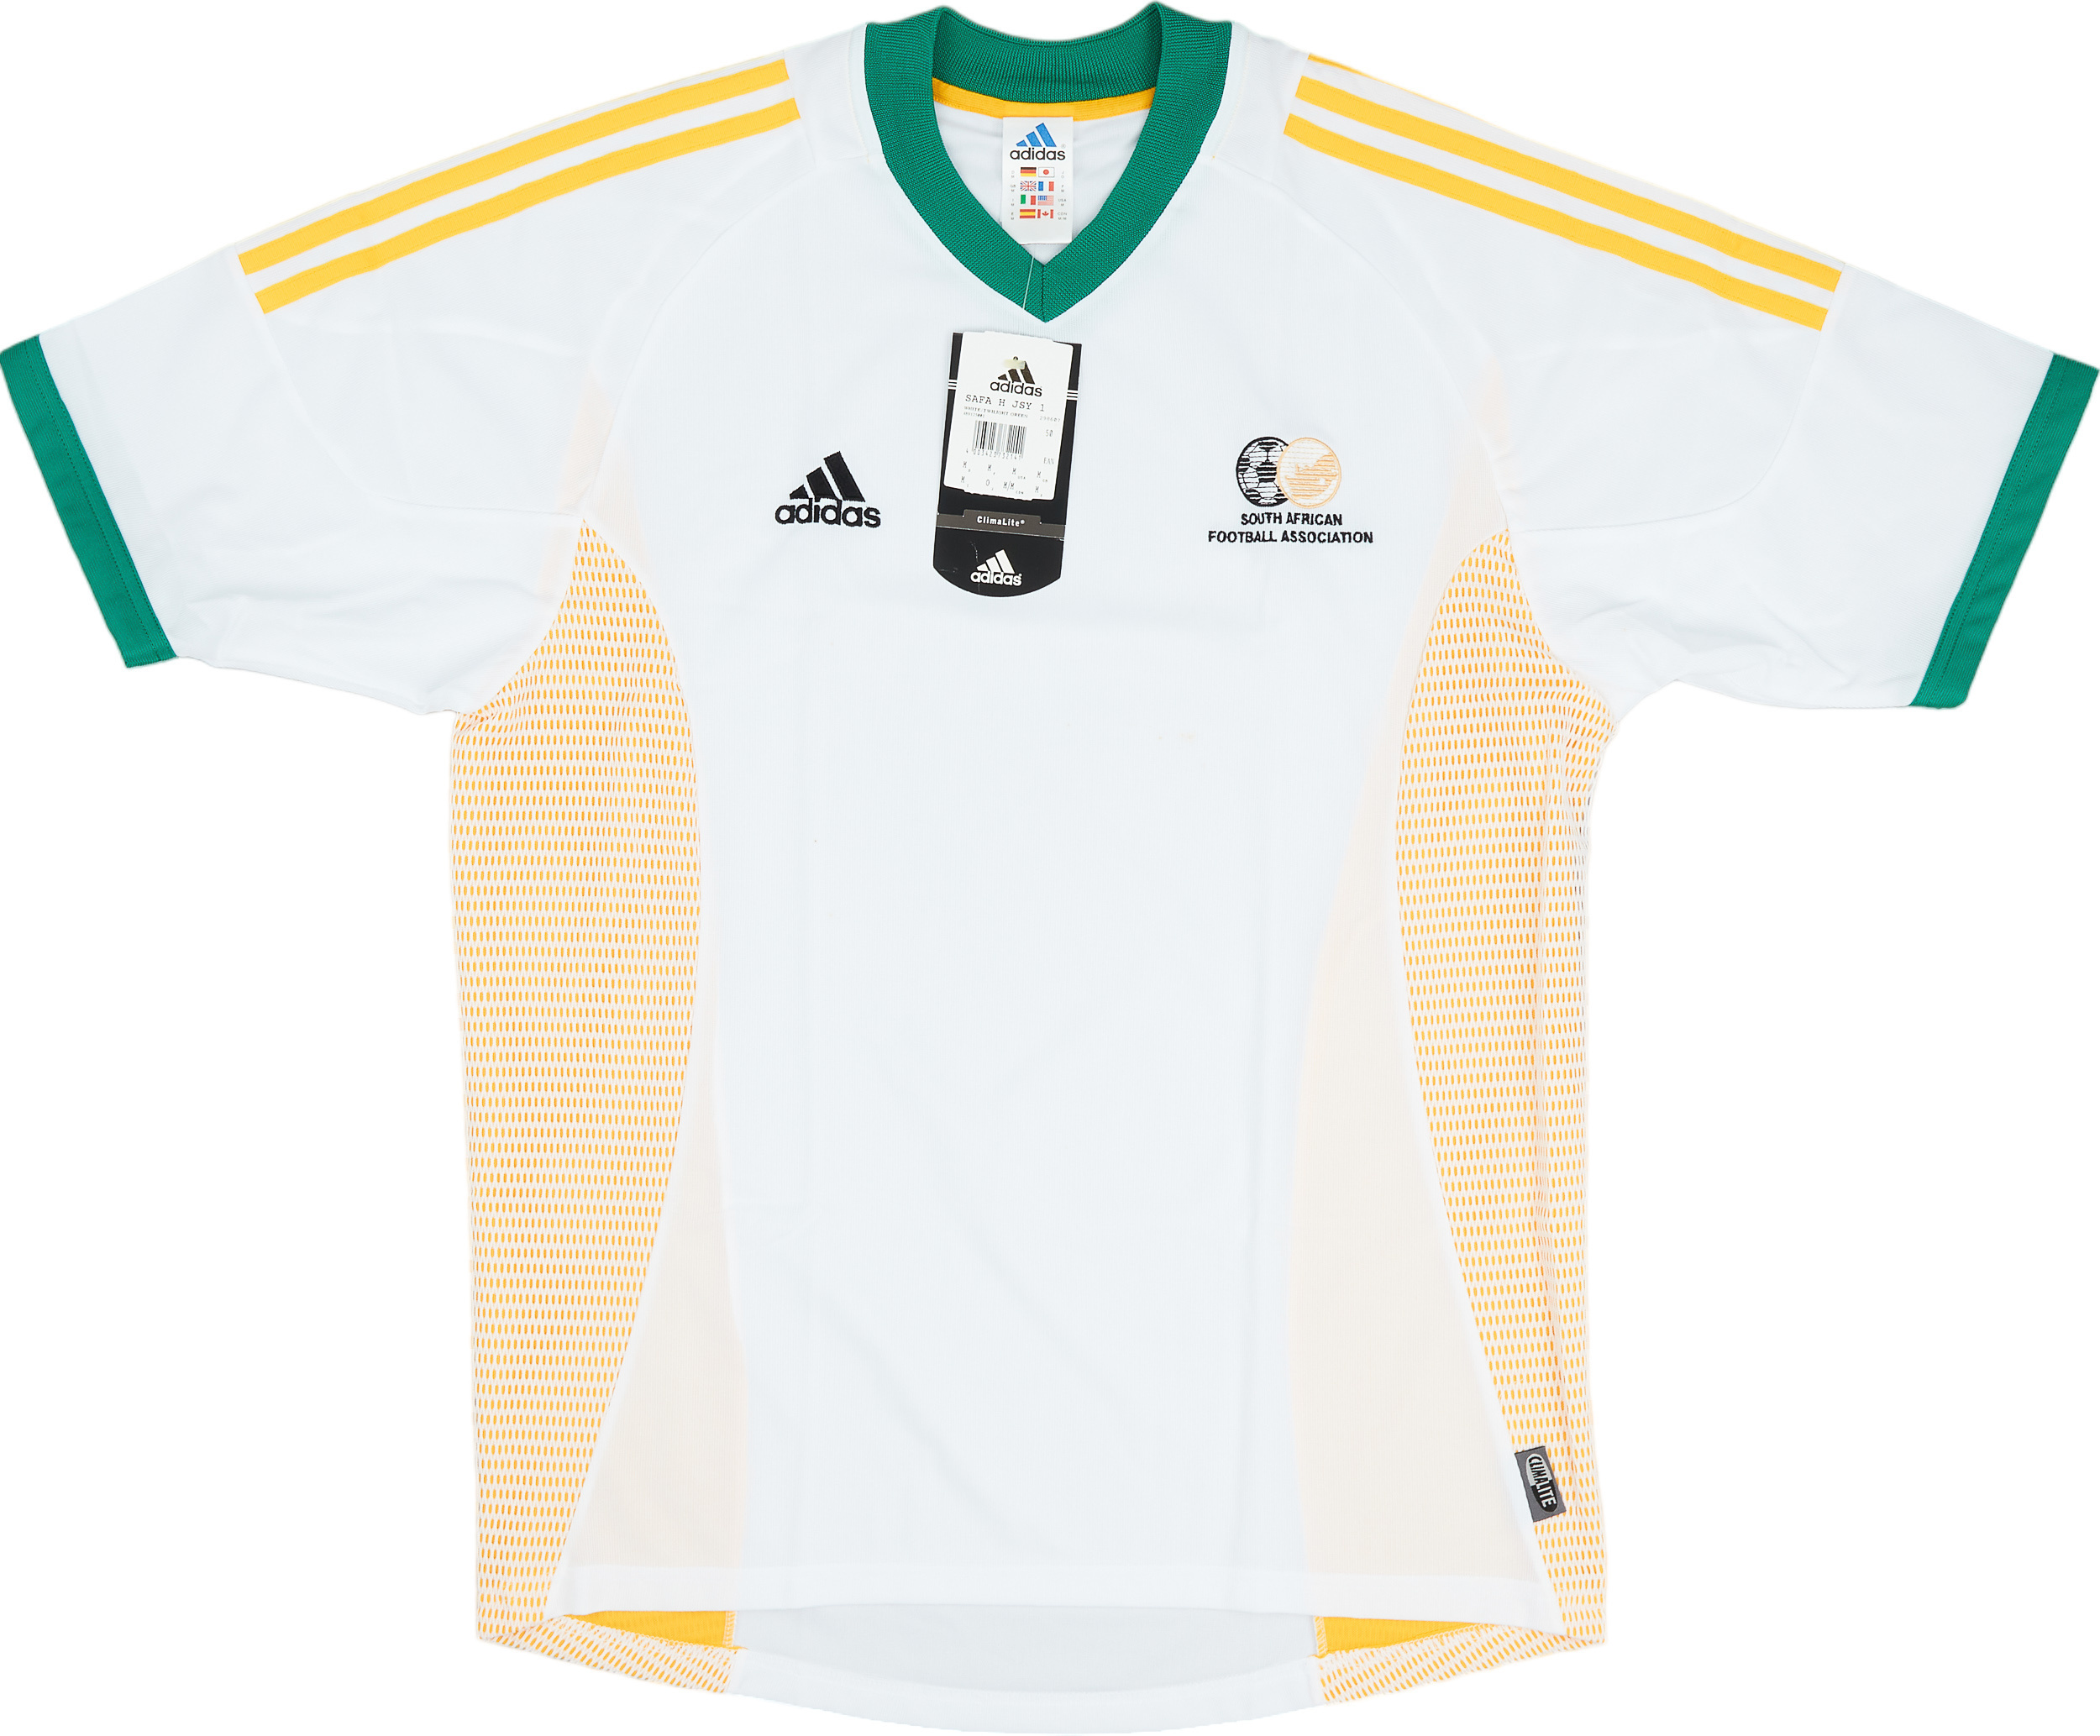 2002-04 South Africa Home Shirt ()